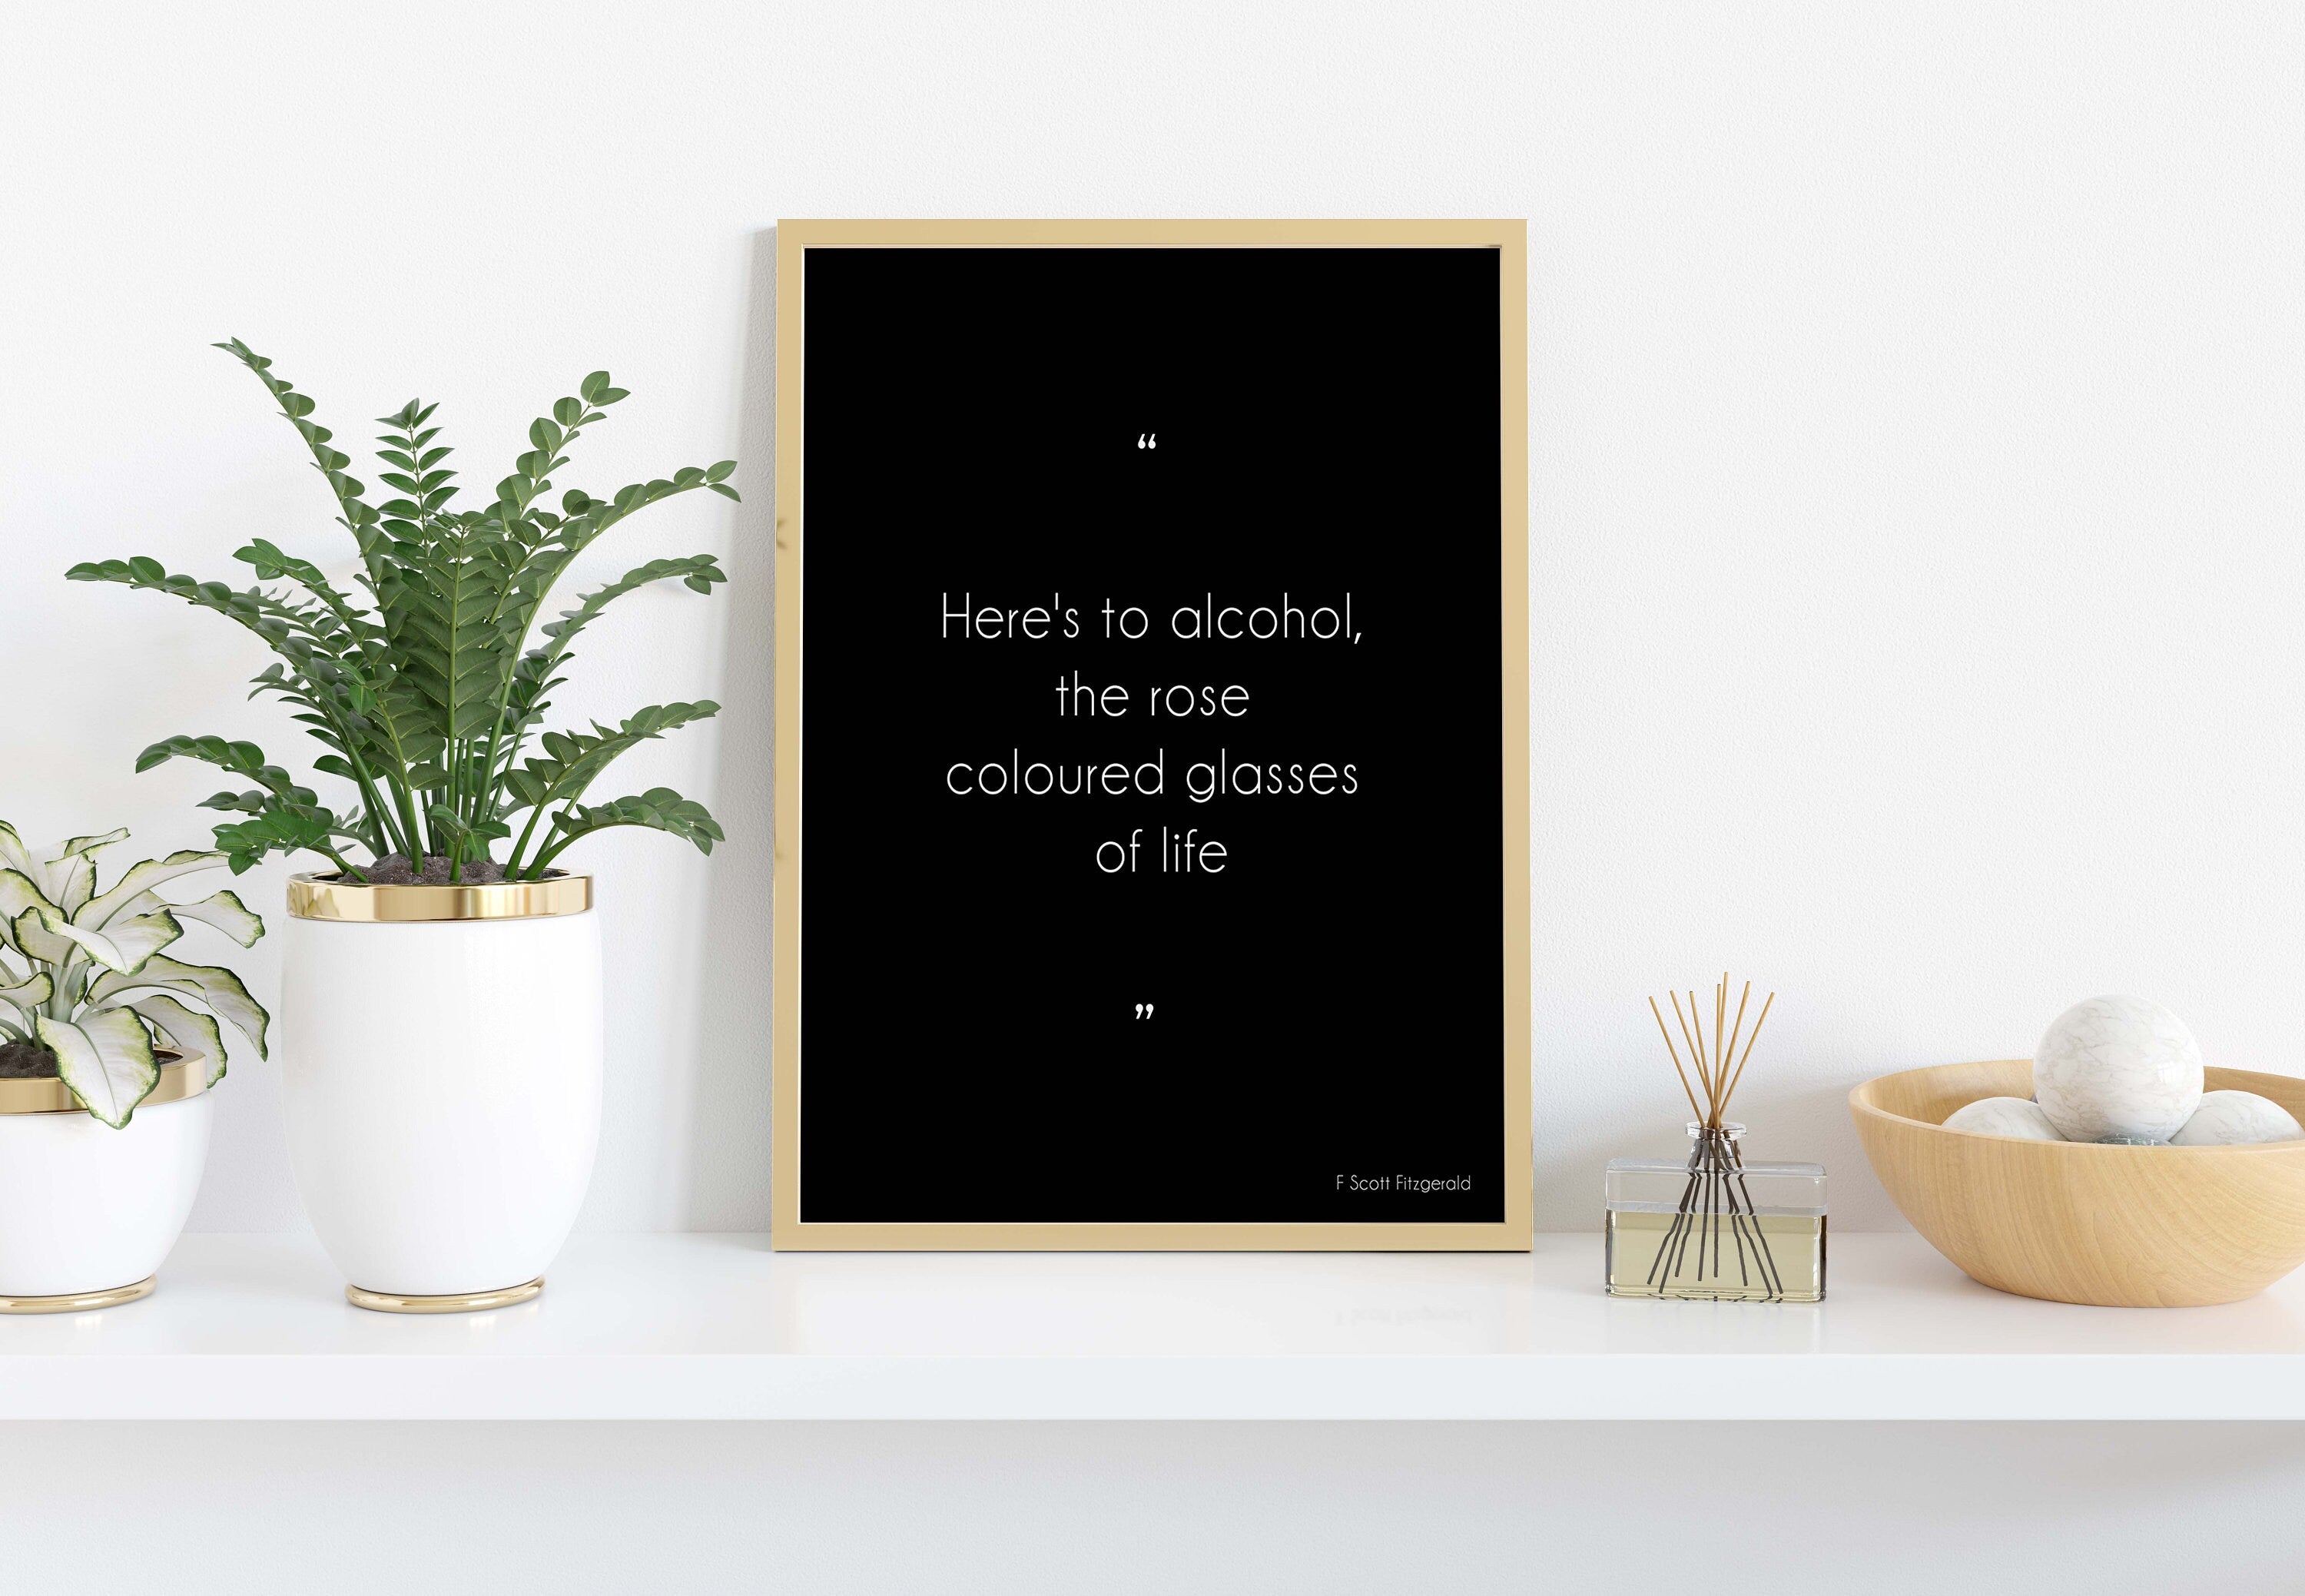 Here's To Alcohol F Scott Fitzgerald Quote Print Minimalist Black & White Wall Art Prints for Dining Room or Kitchen Wall Decor